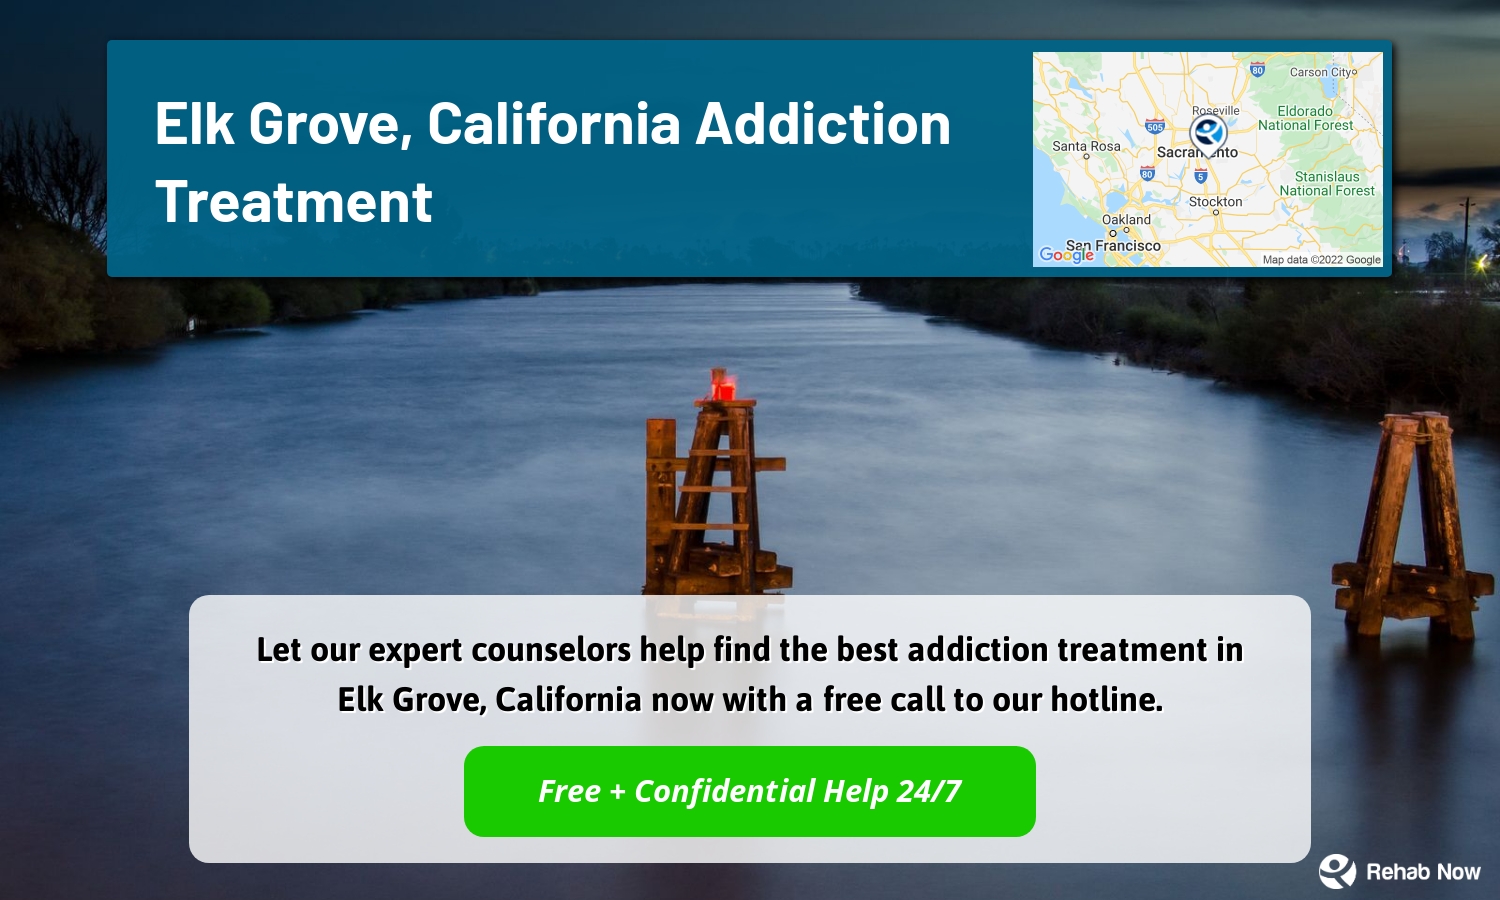 Let our expert counselors help find the best addiction treatment in Elk Grove, California now with a free call to our hotline.